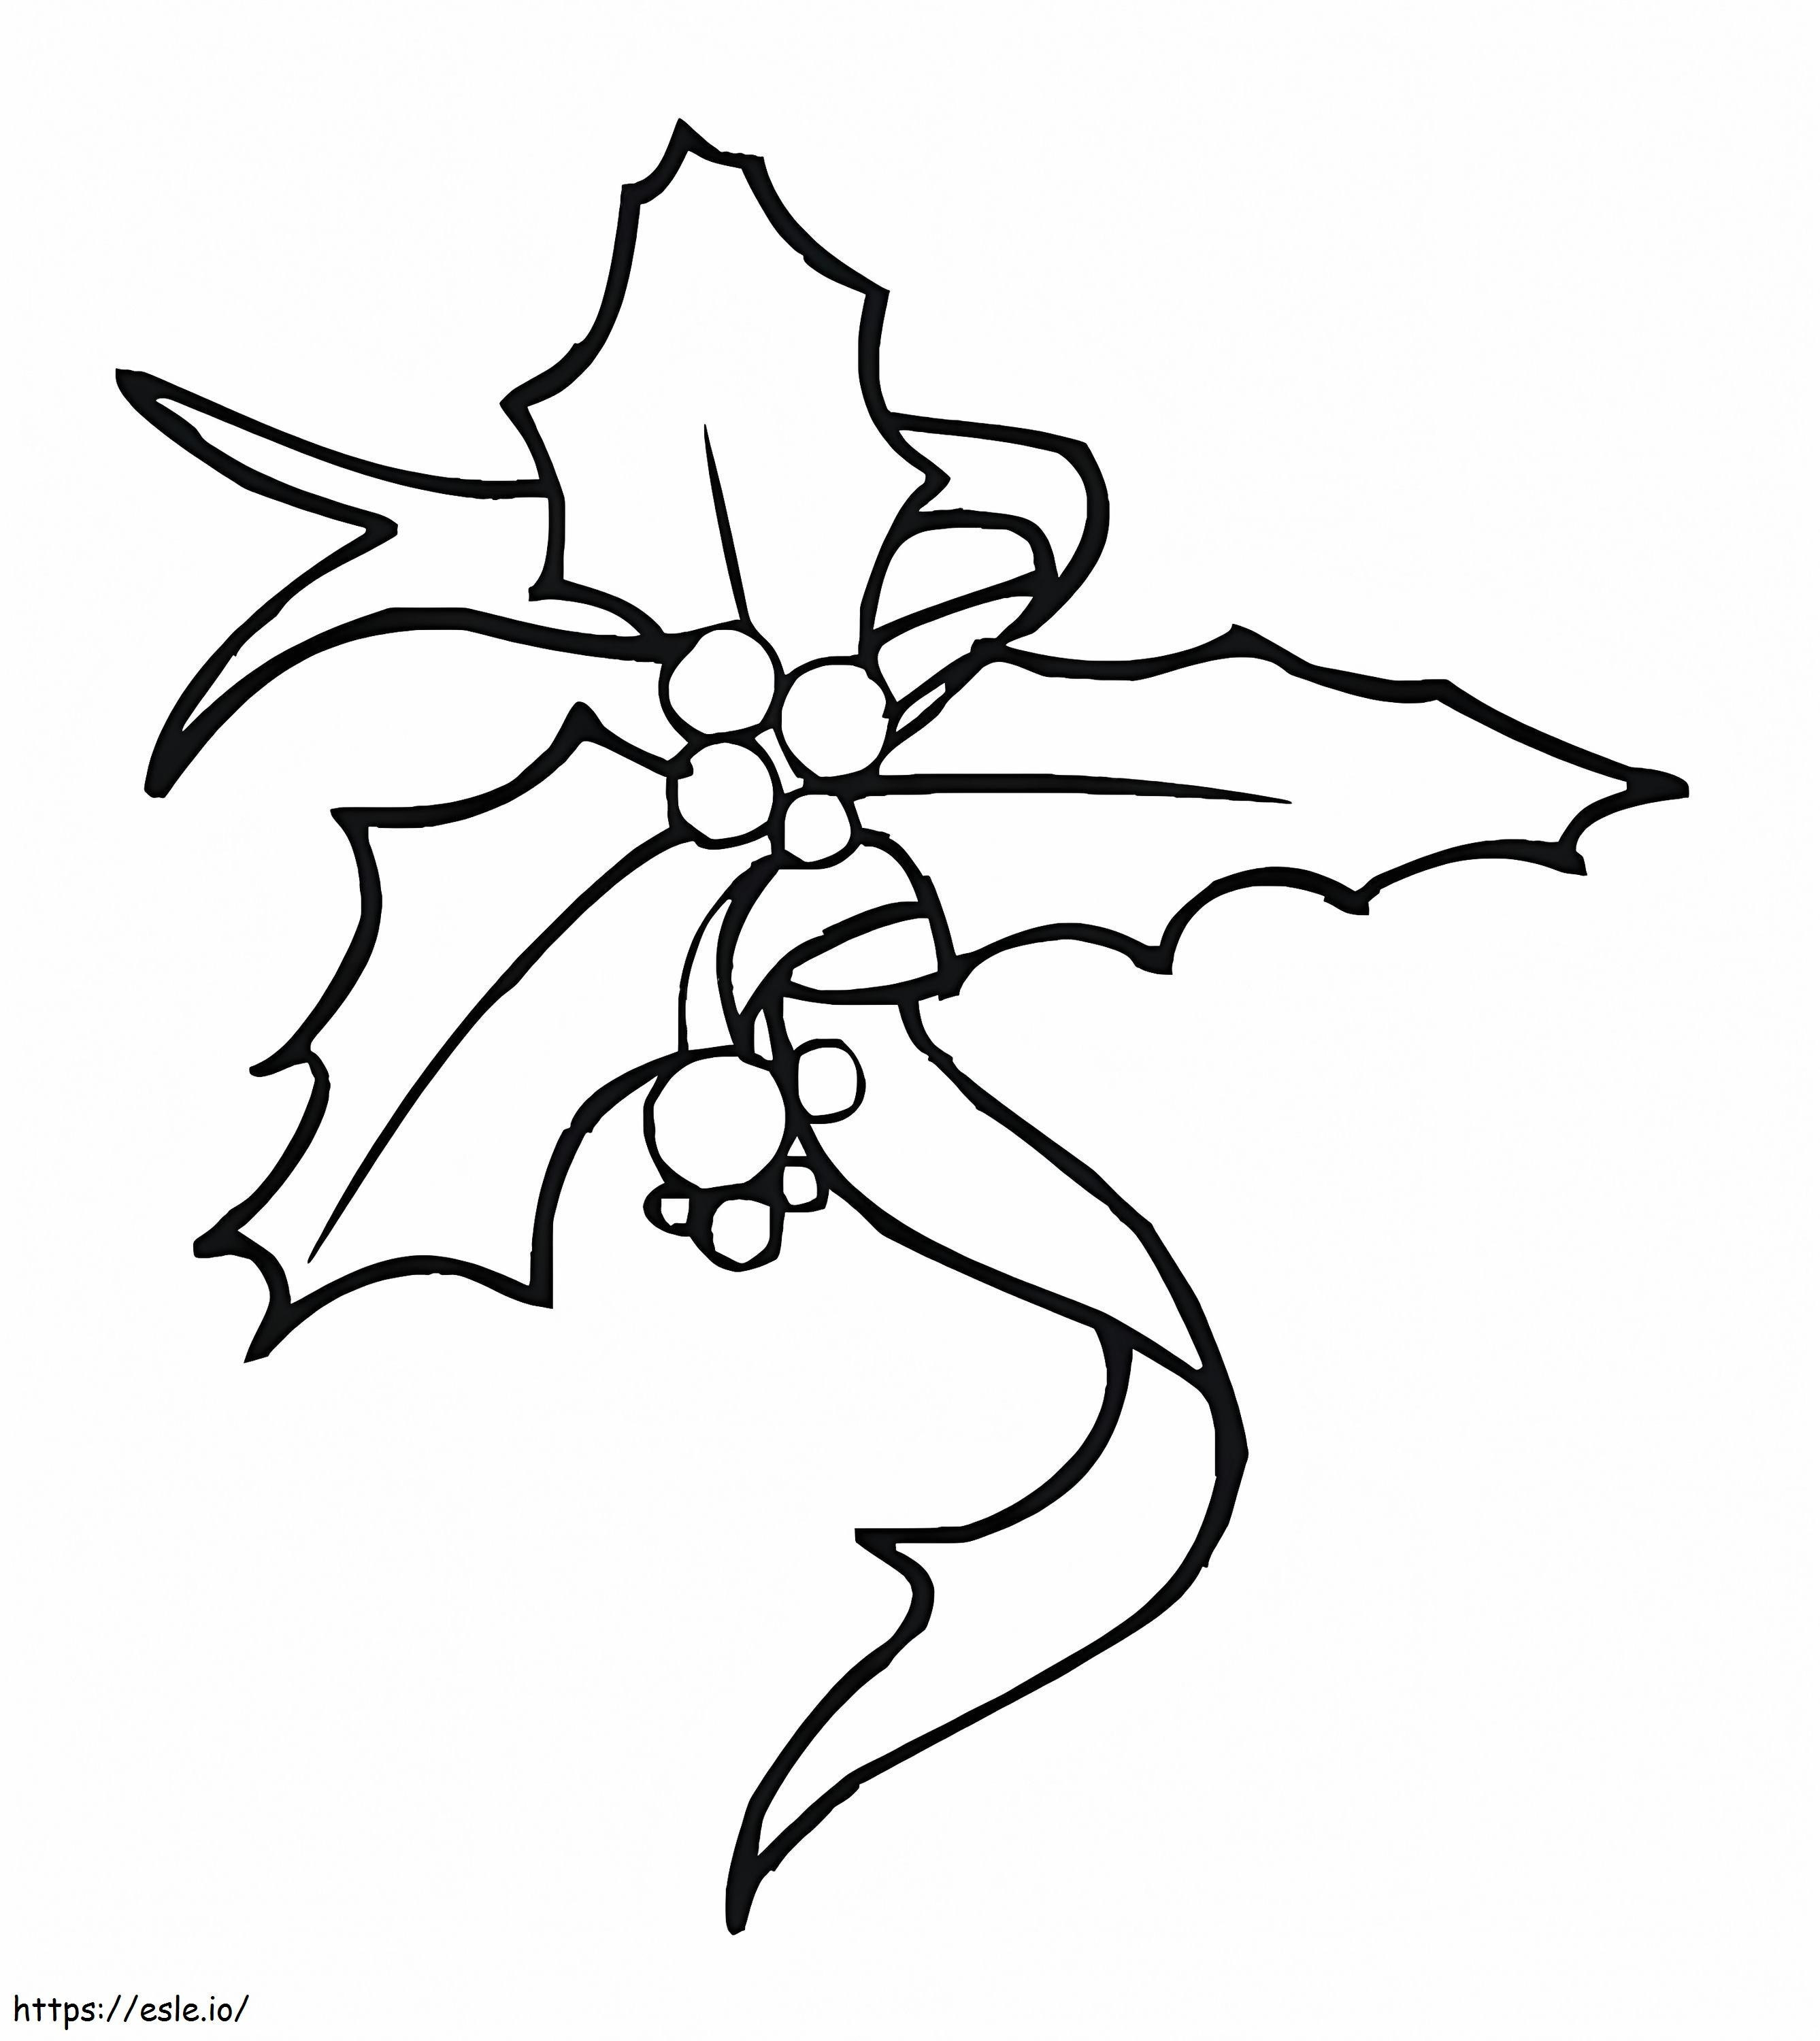 Christmas Holly With Ribbon coloring page